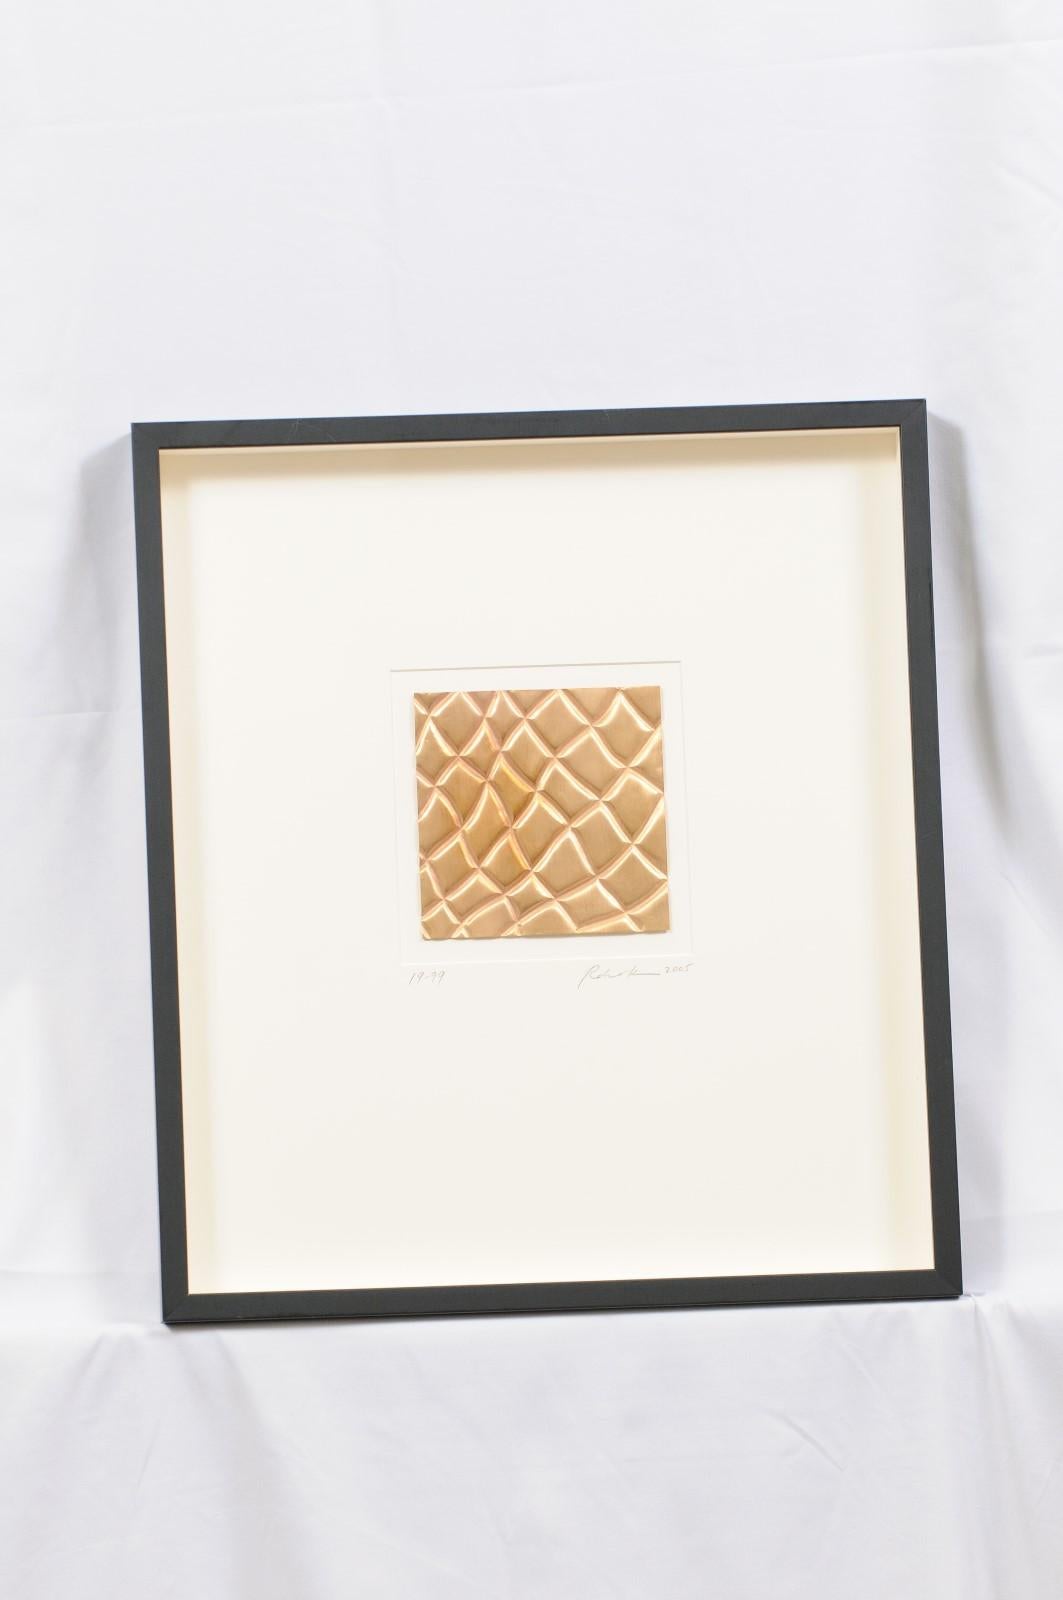 Robert Kuo Repousse Hammered Tile - Edition 1999. 2005 Limited edition.